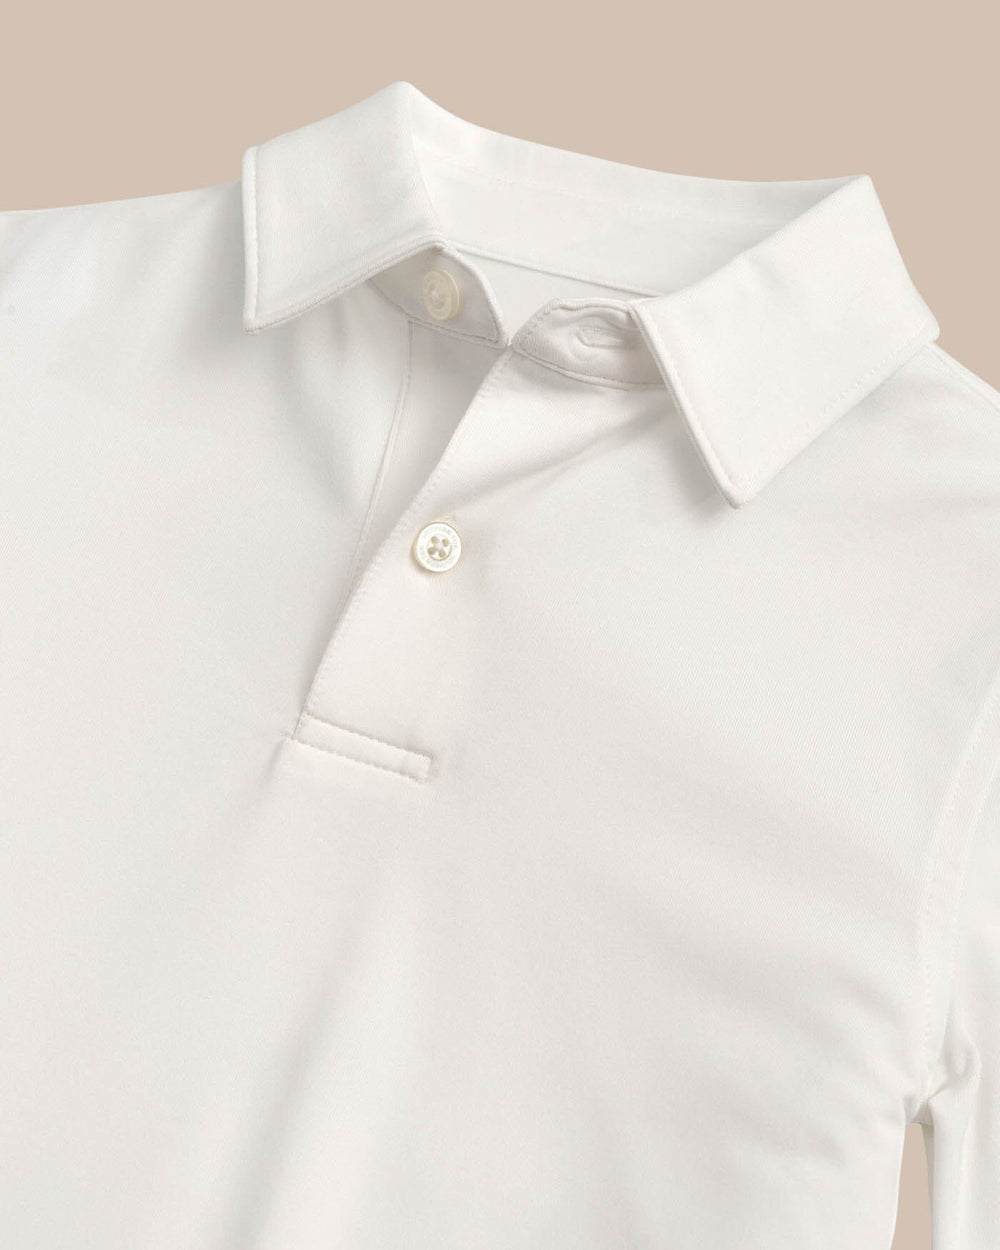 The detail view of the Boys Driver Performance Polo Shirt by Southern Tide - Classic White